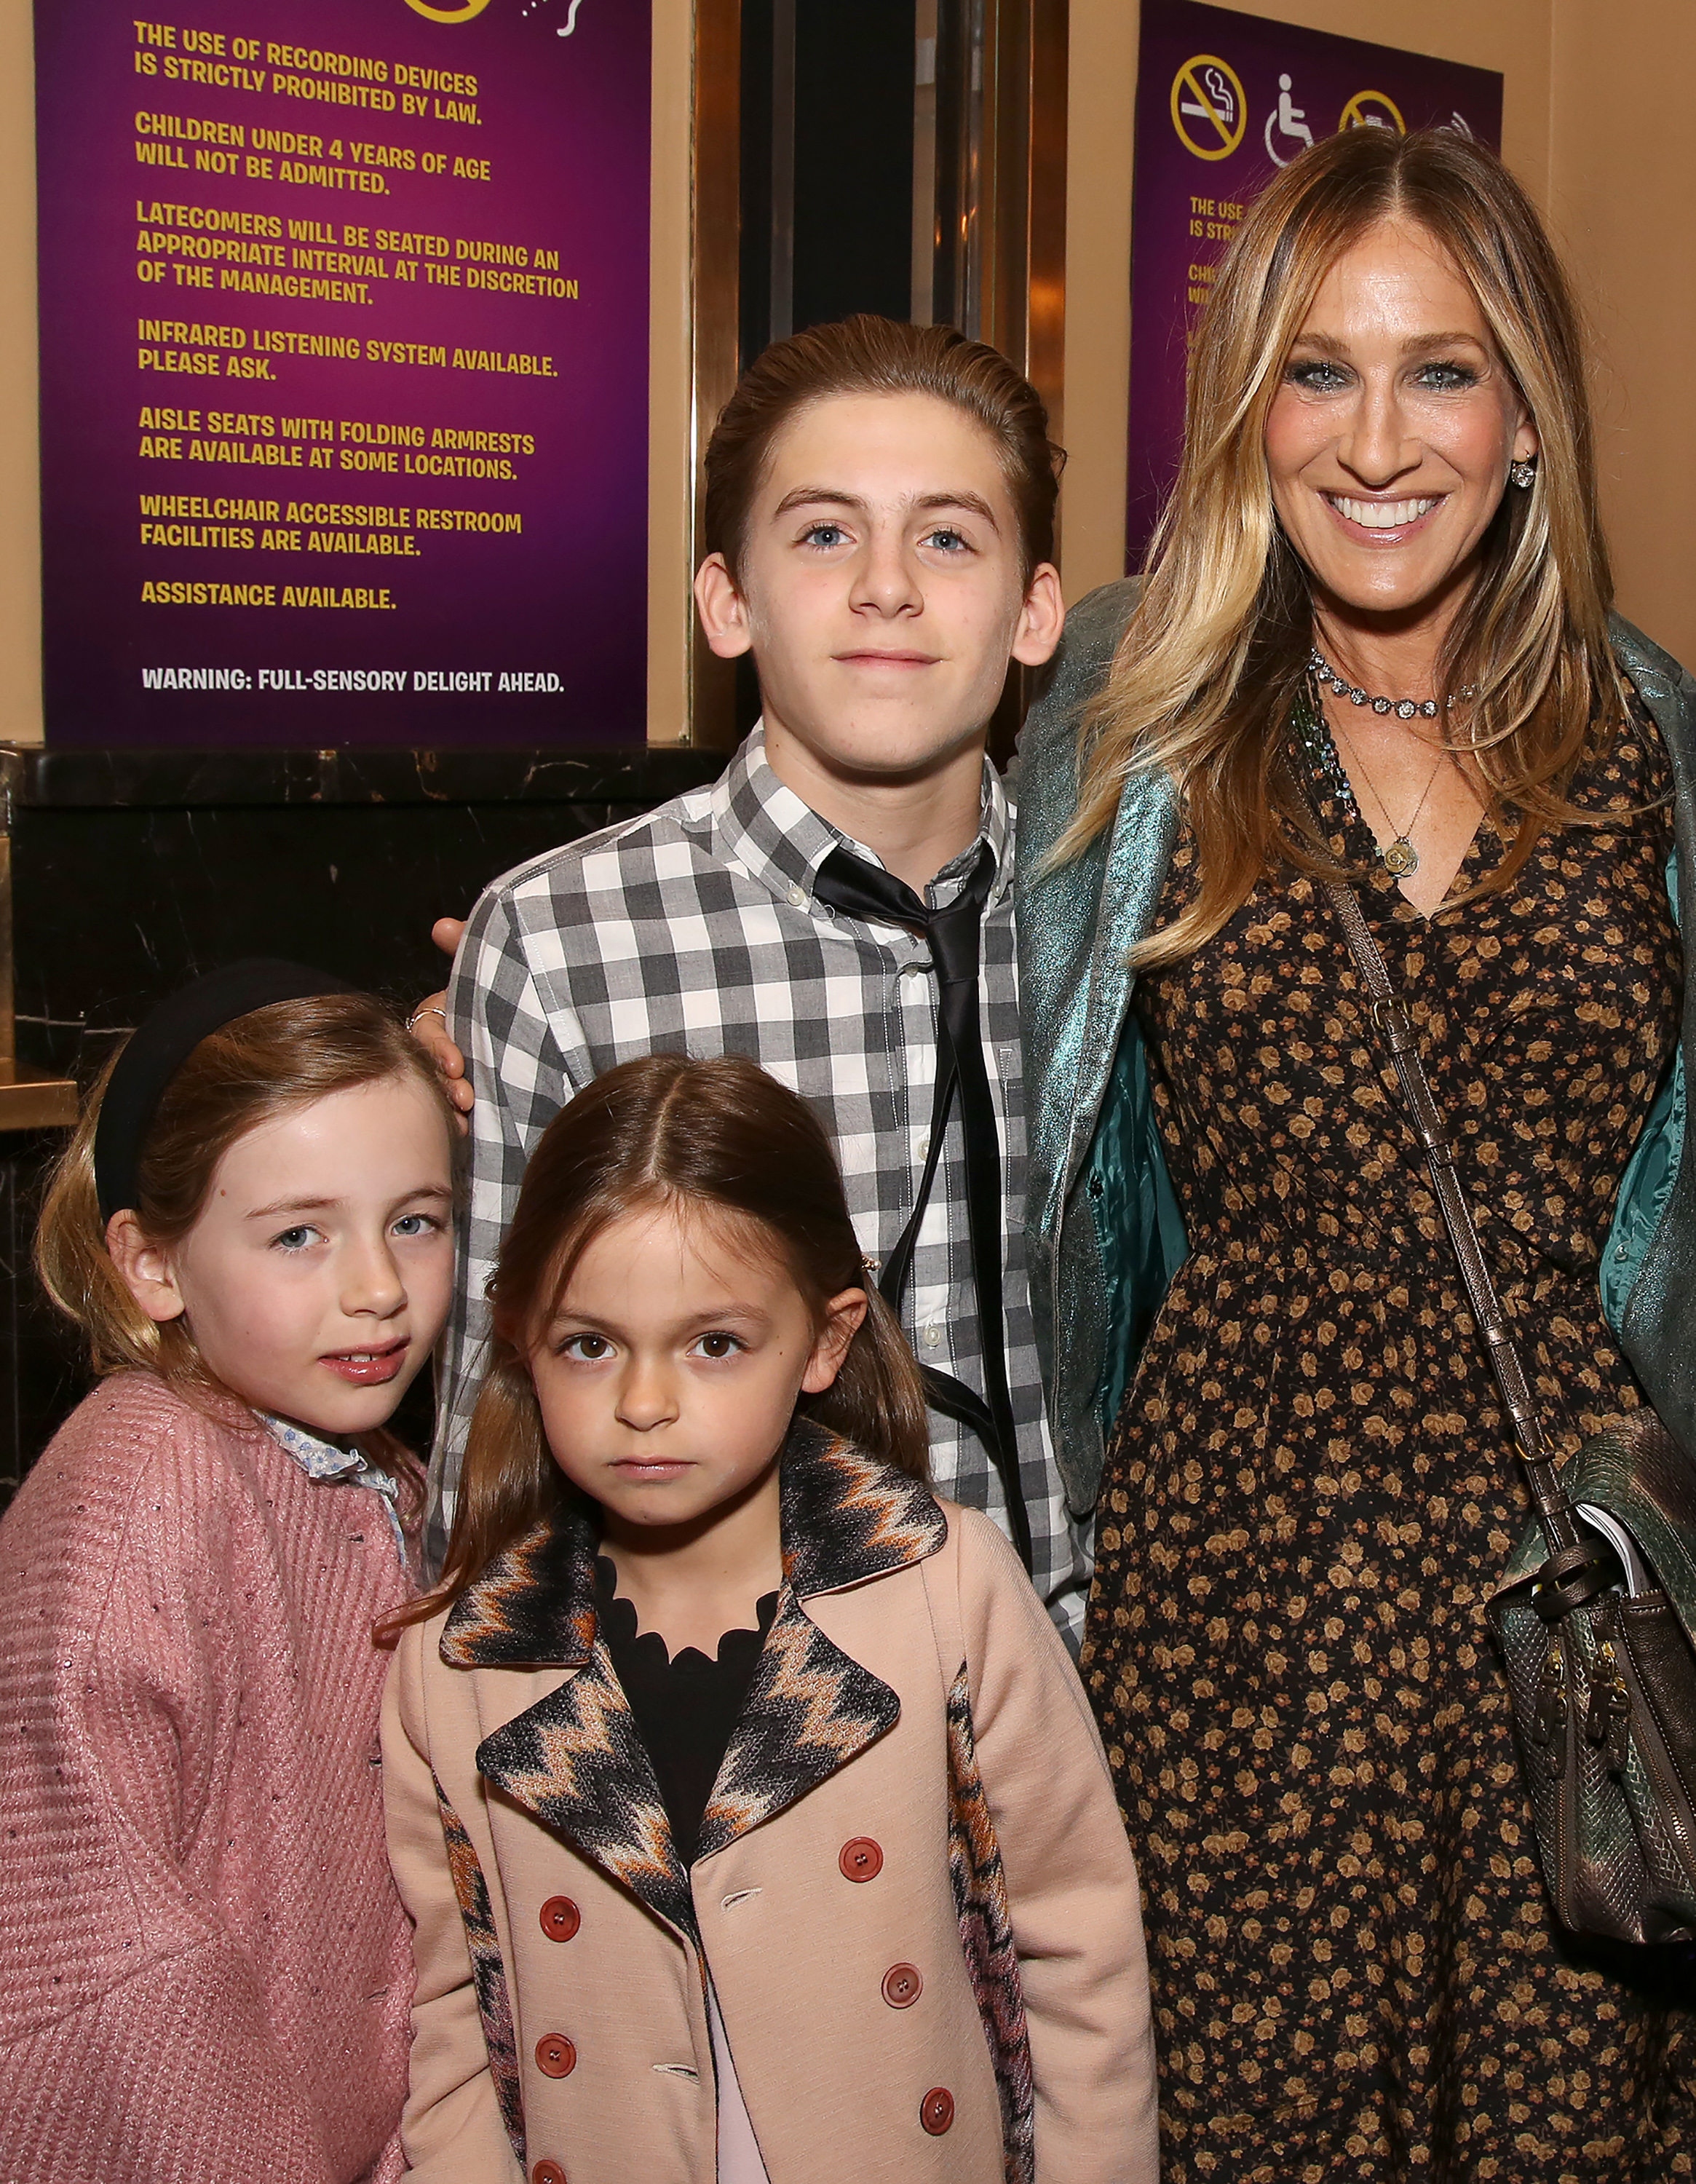 Tabitha Broderick, Marion Loretta Broderick, James Wilkie Broderick and Sarah Jessica Parker attending the Broadway Opening Performance for "Charlie and the Chocolate Factory" in New York City on April 23, 2017 | Source: Getty Images